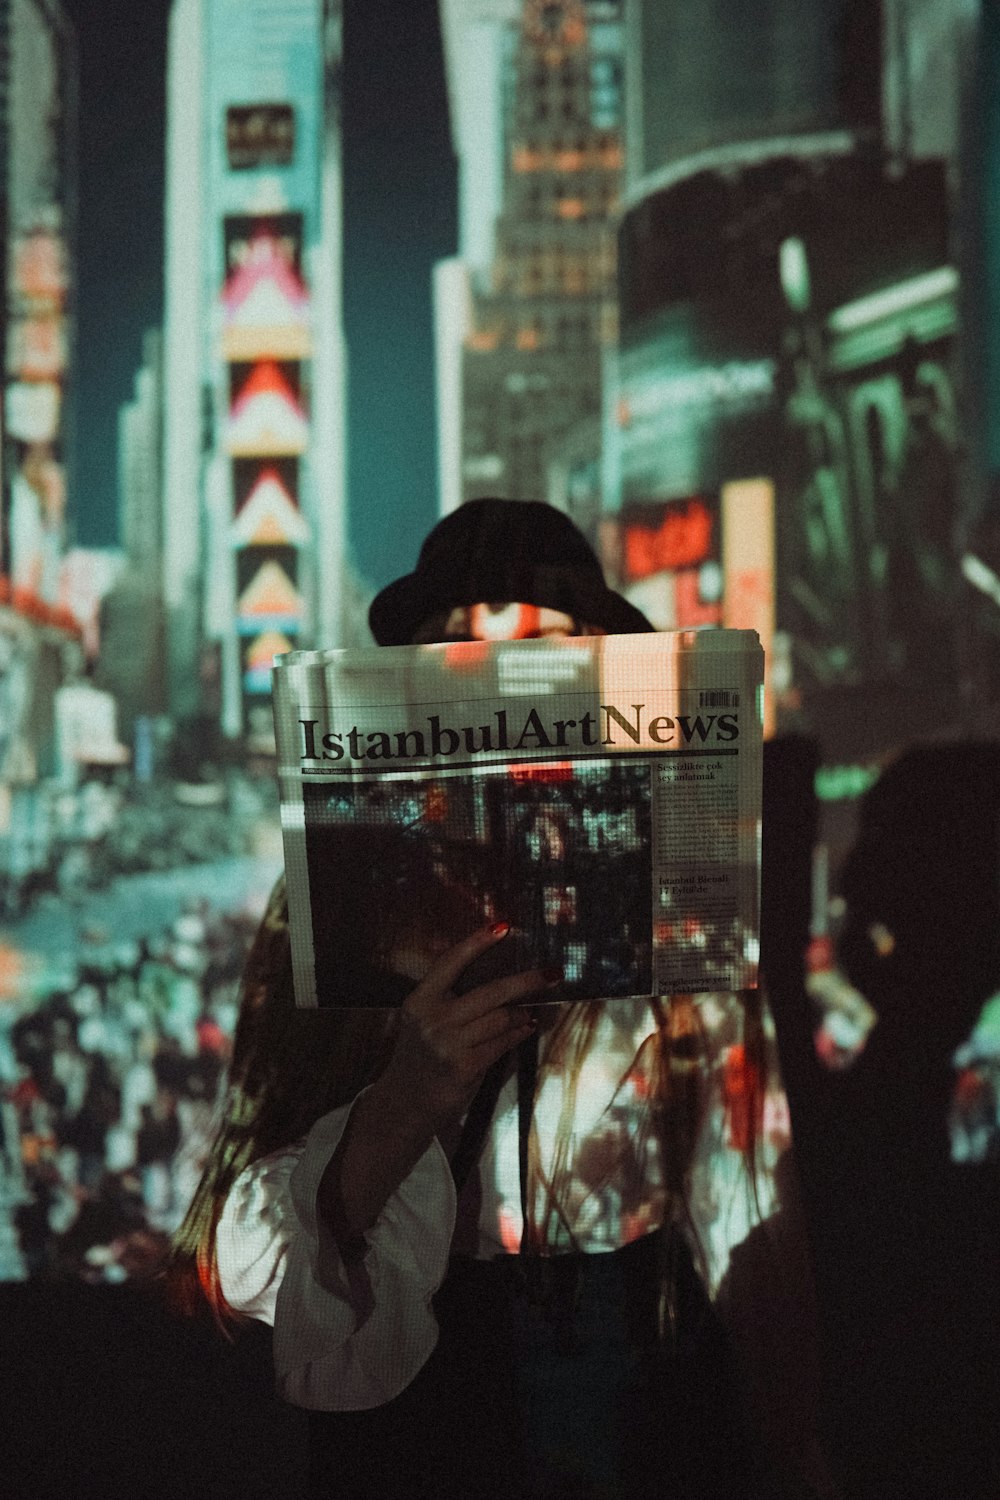 a person holding up a newspaper in front of a cityscape